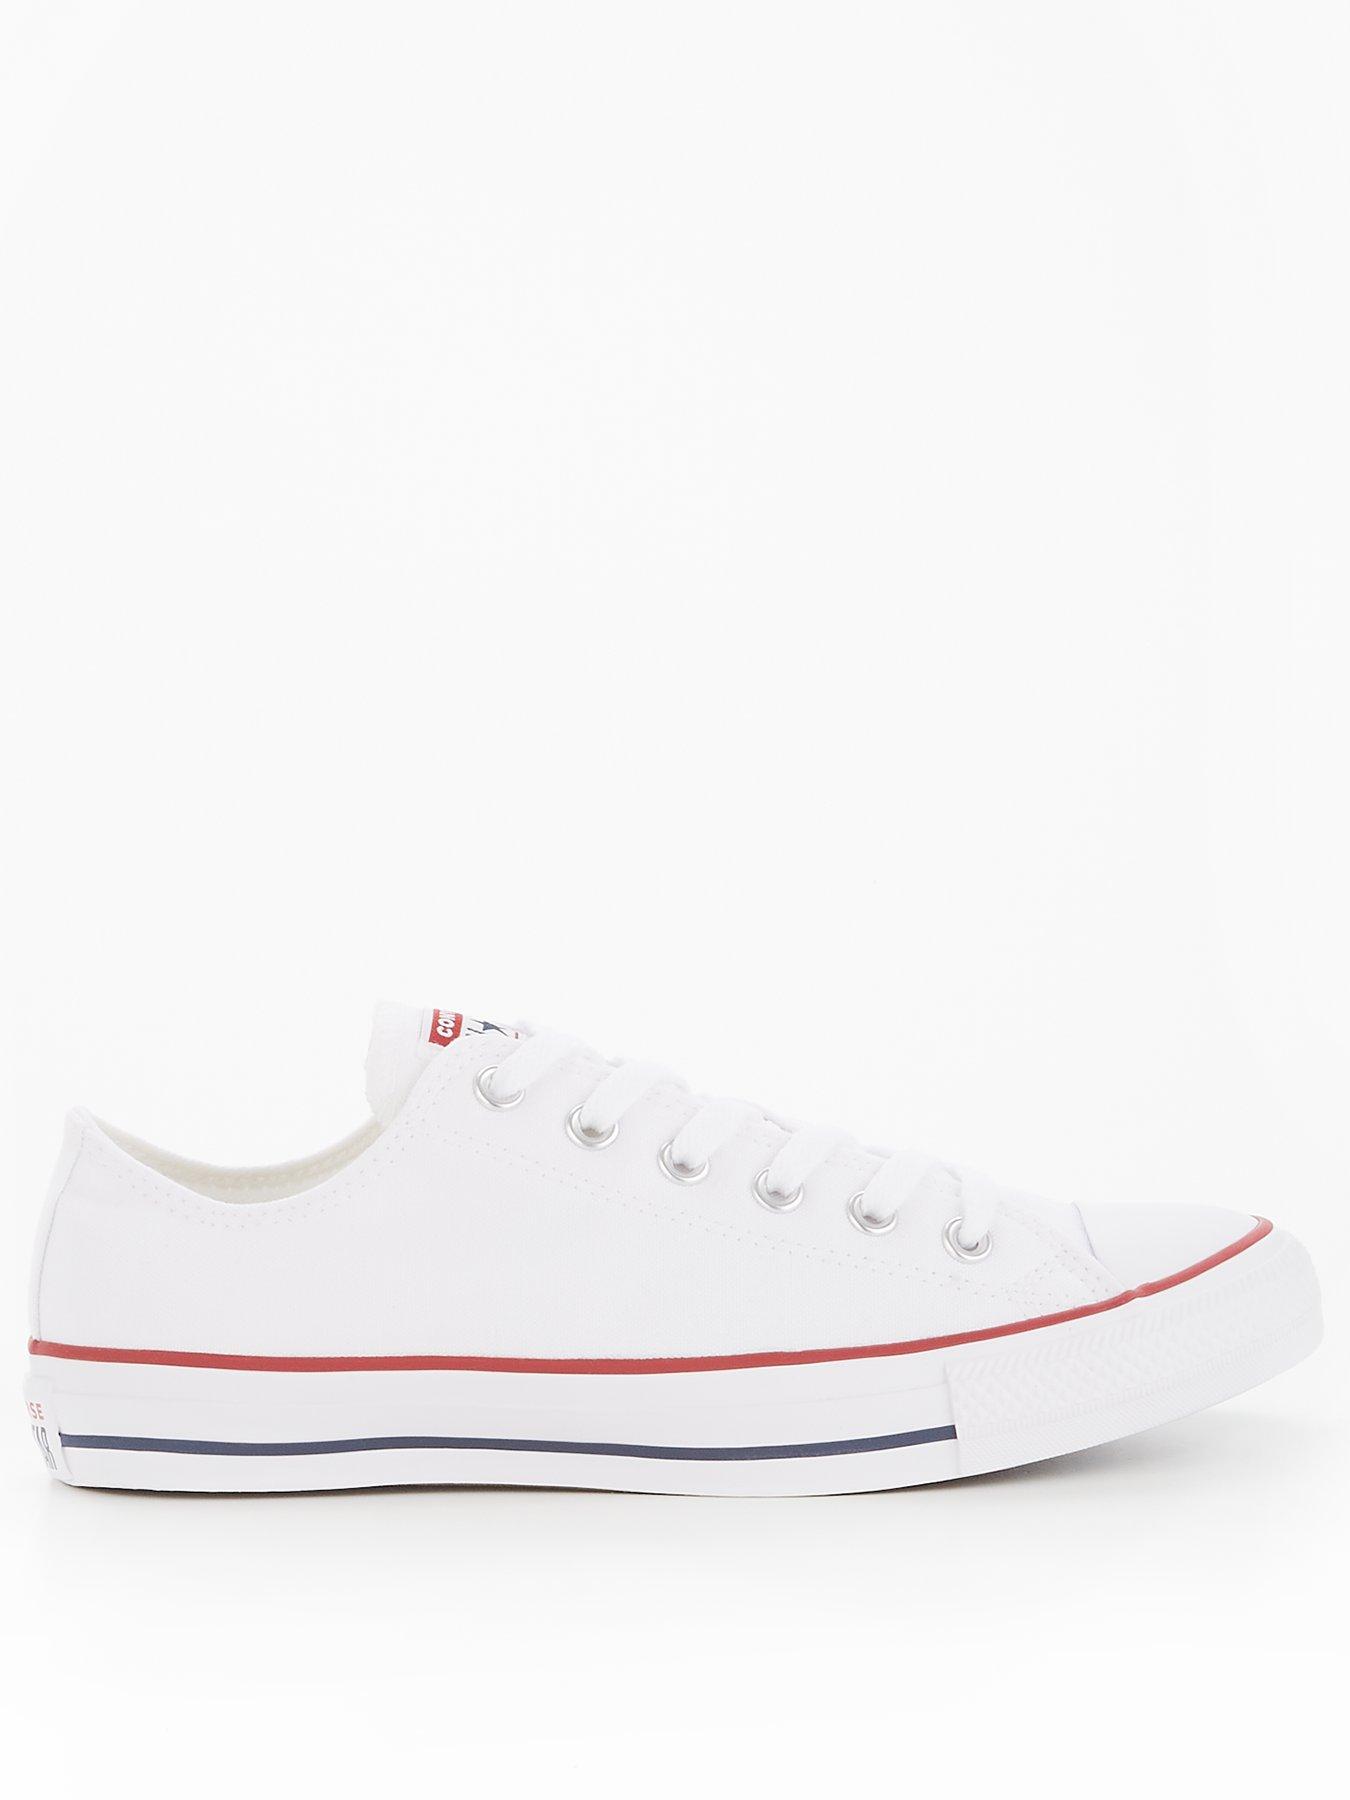 mens white converse trainers